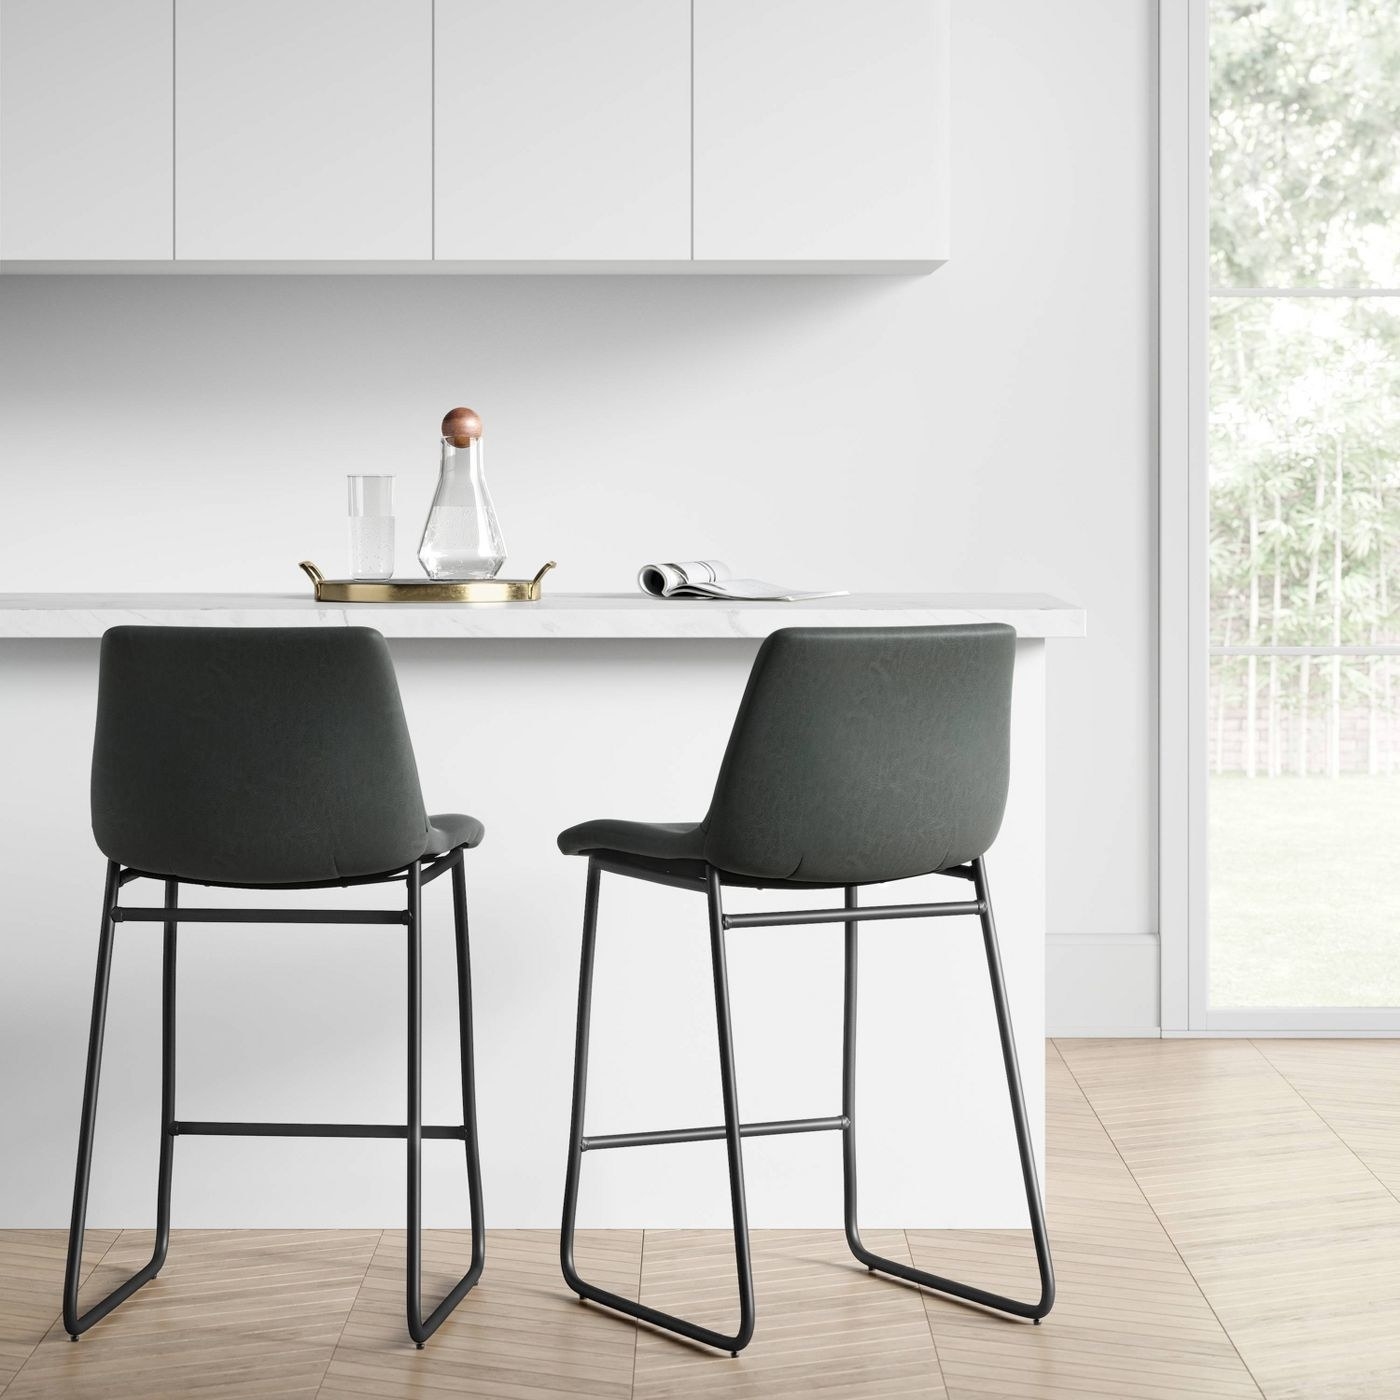 A set of two grey bar stools in front on a kitchen counter